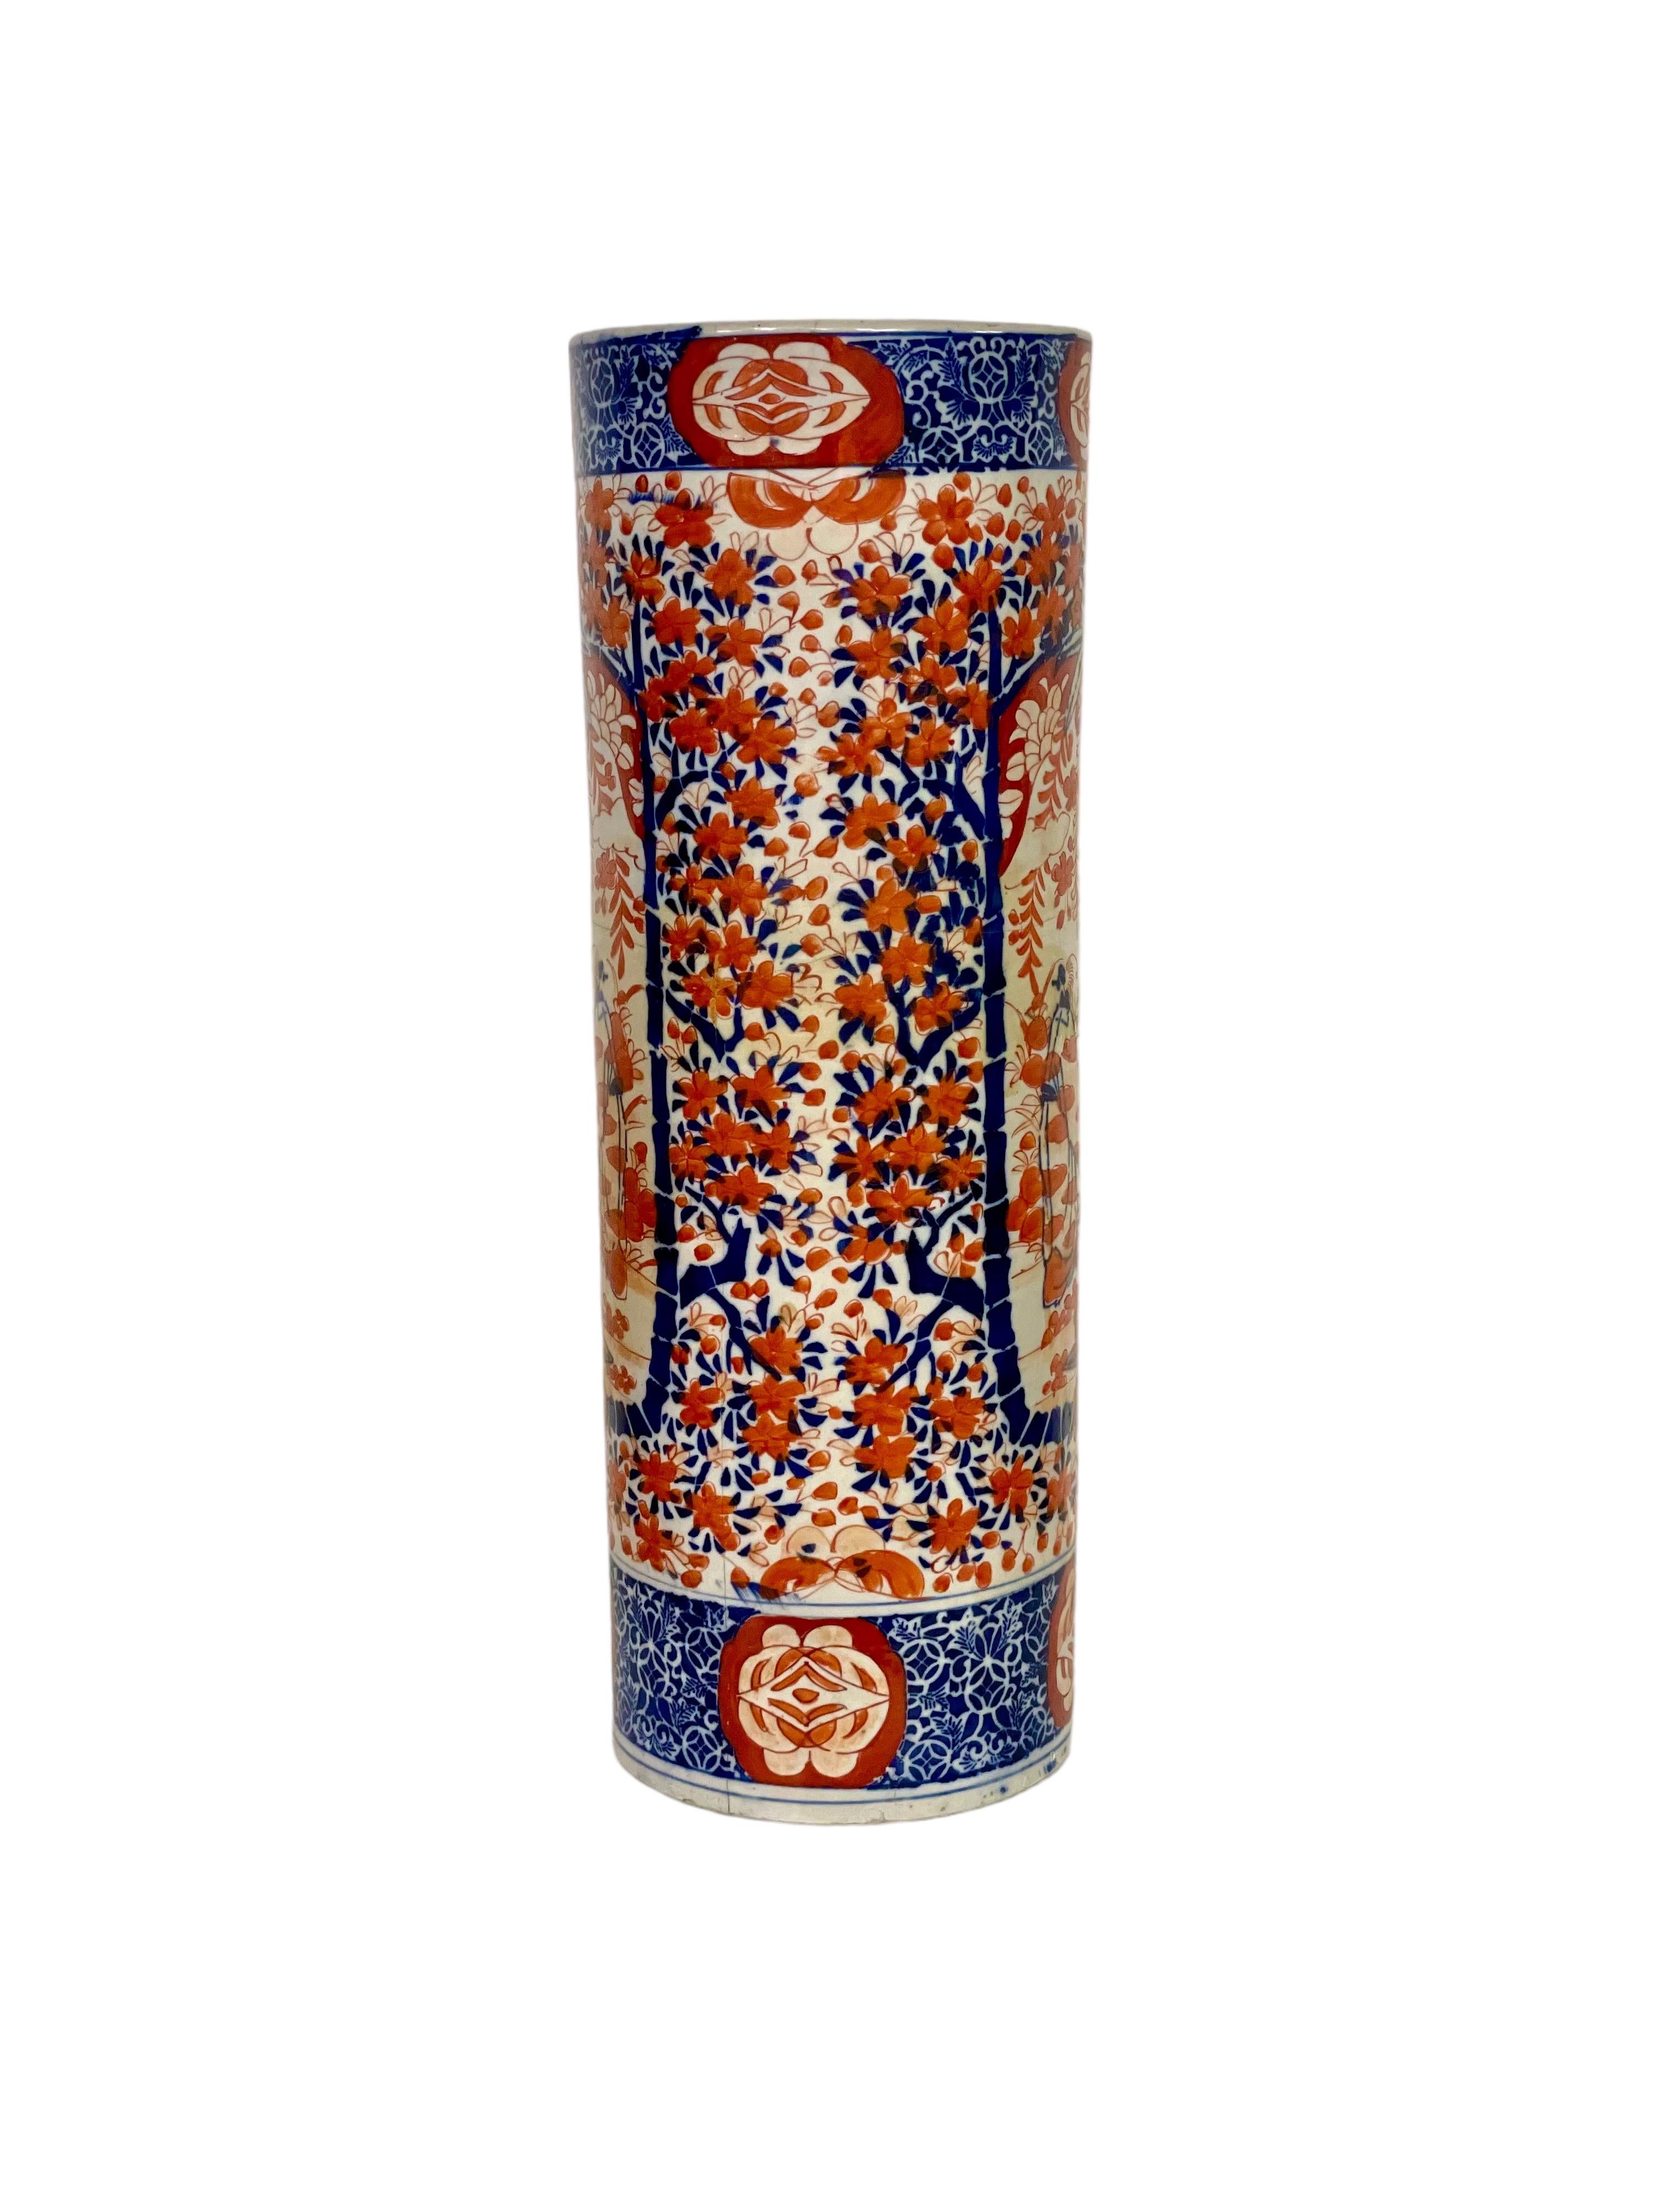 An ideal decoration for a stylish hallway, this Japanese Imari porcelain umbrella stand dates from the end of the 19th century. Known for its colourful decorative style, Imari porcelain features vivid hand-painted designs in bright shades of cobalt